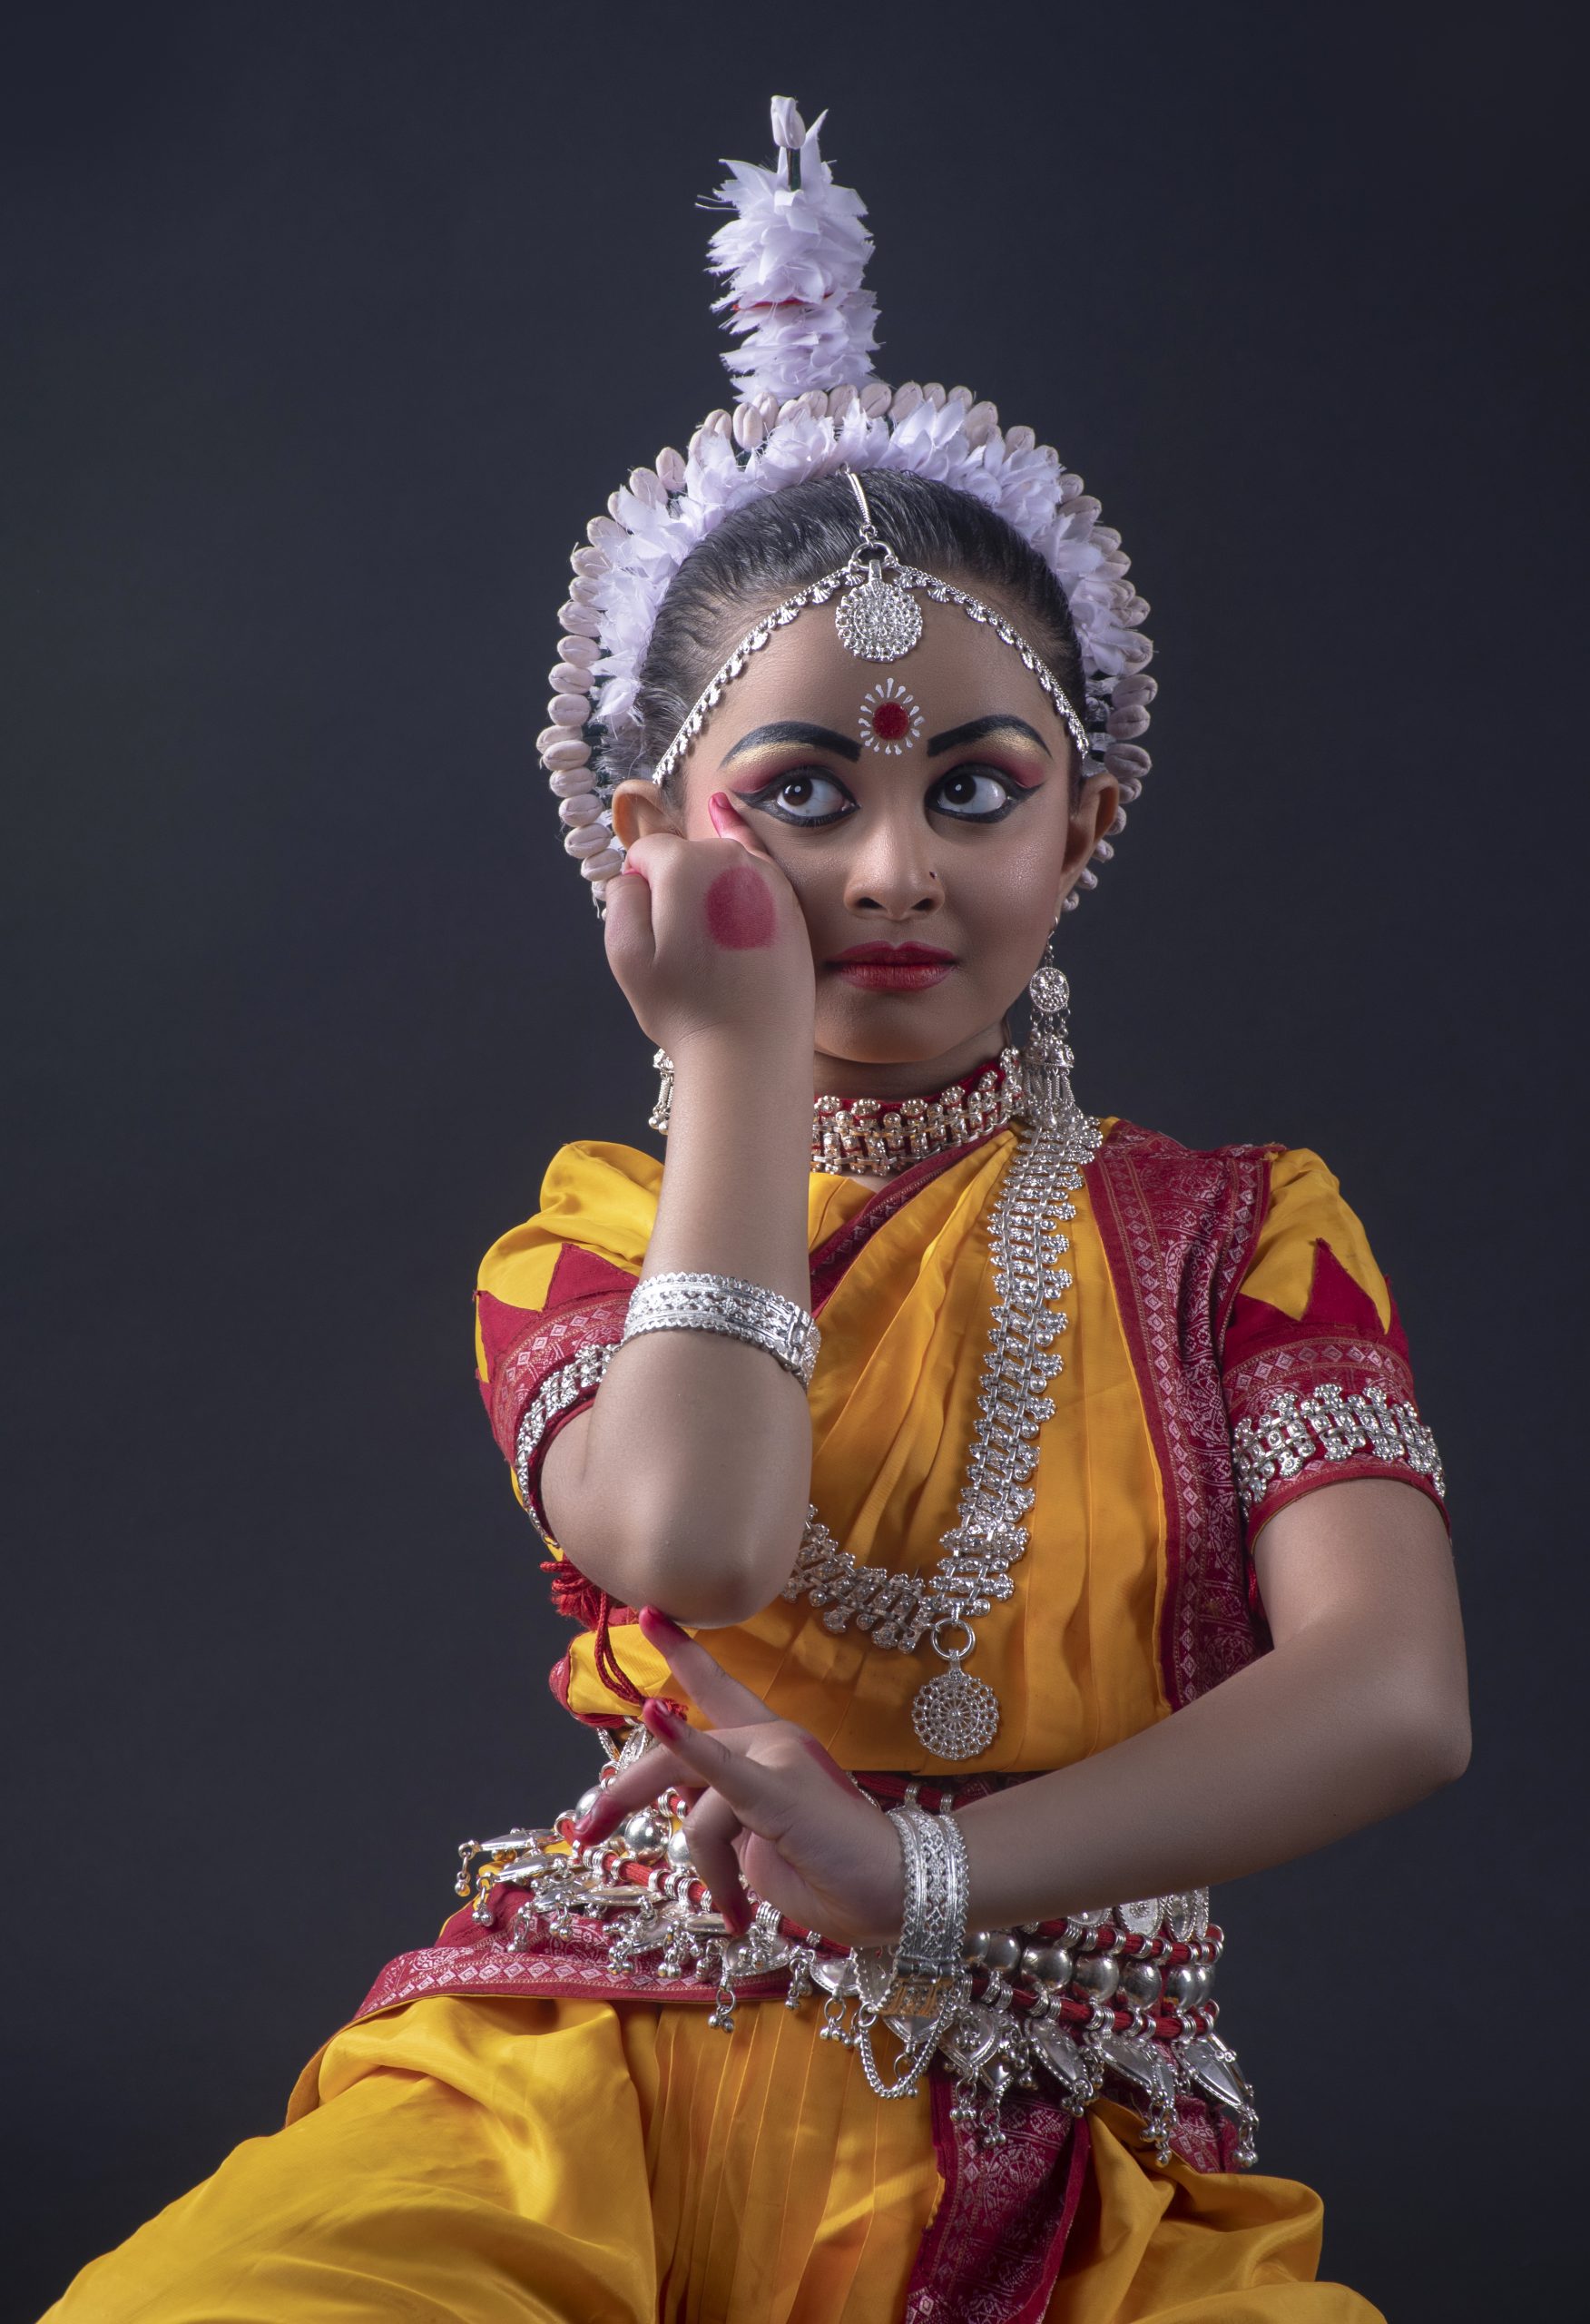 A little girl performing classical dance